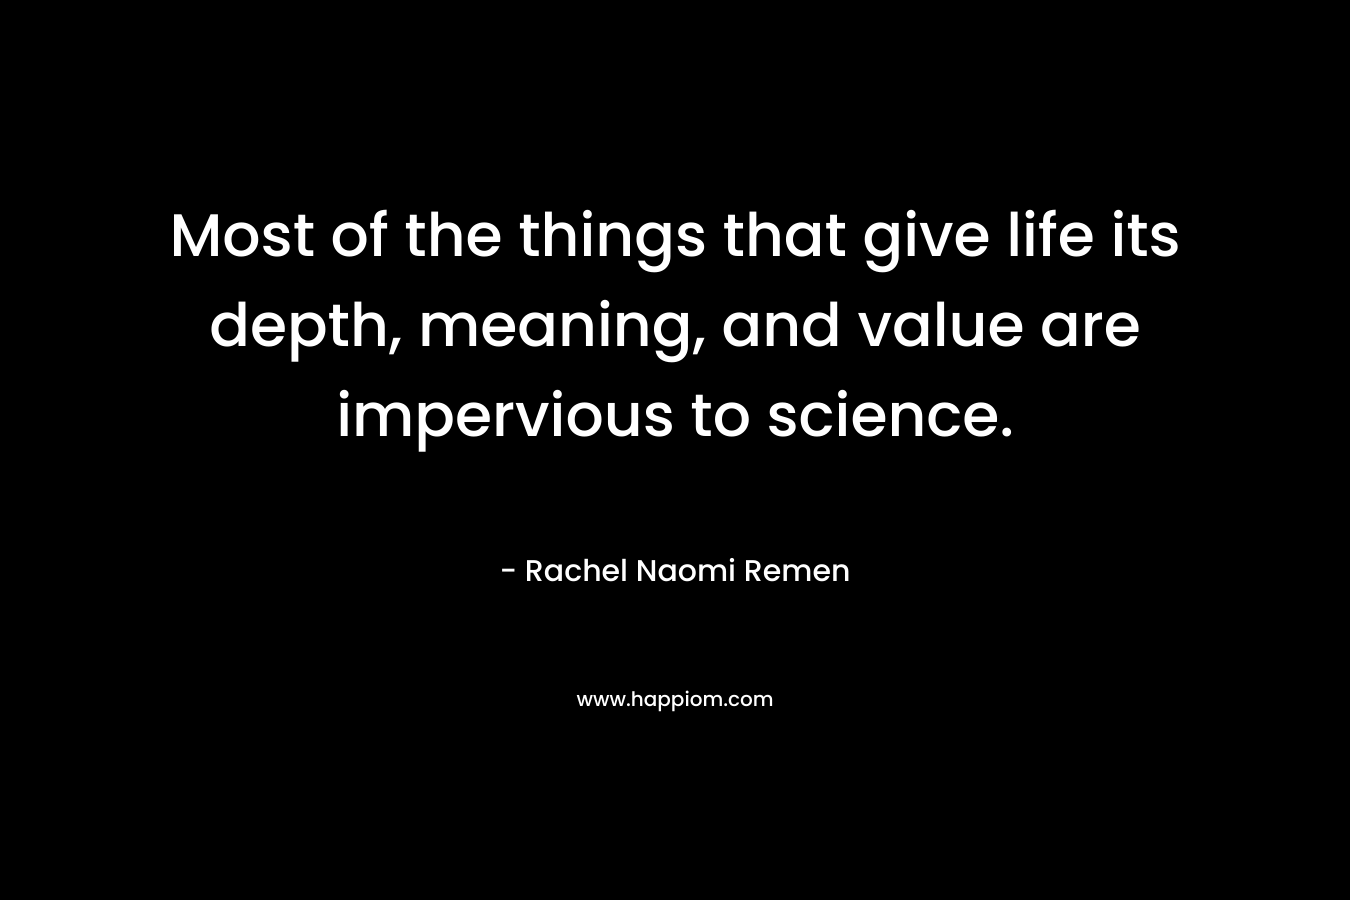 Most of the things that give life its depth, meaning, and value are impervious to science. – Rachel Naomi Remen